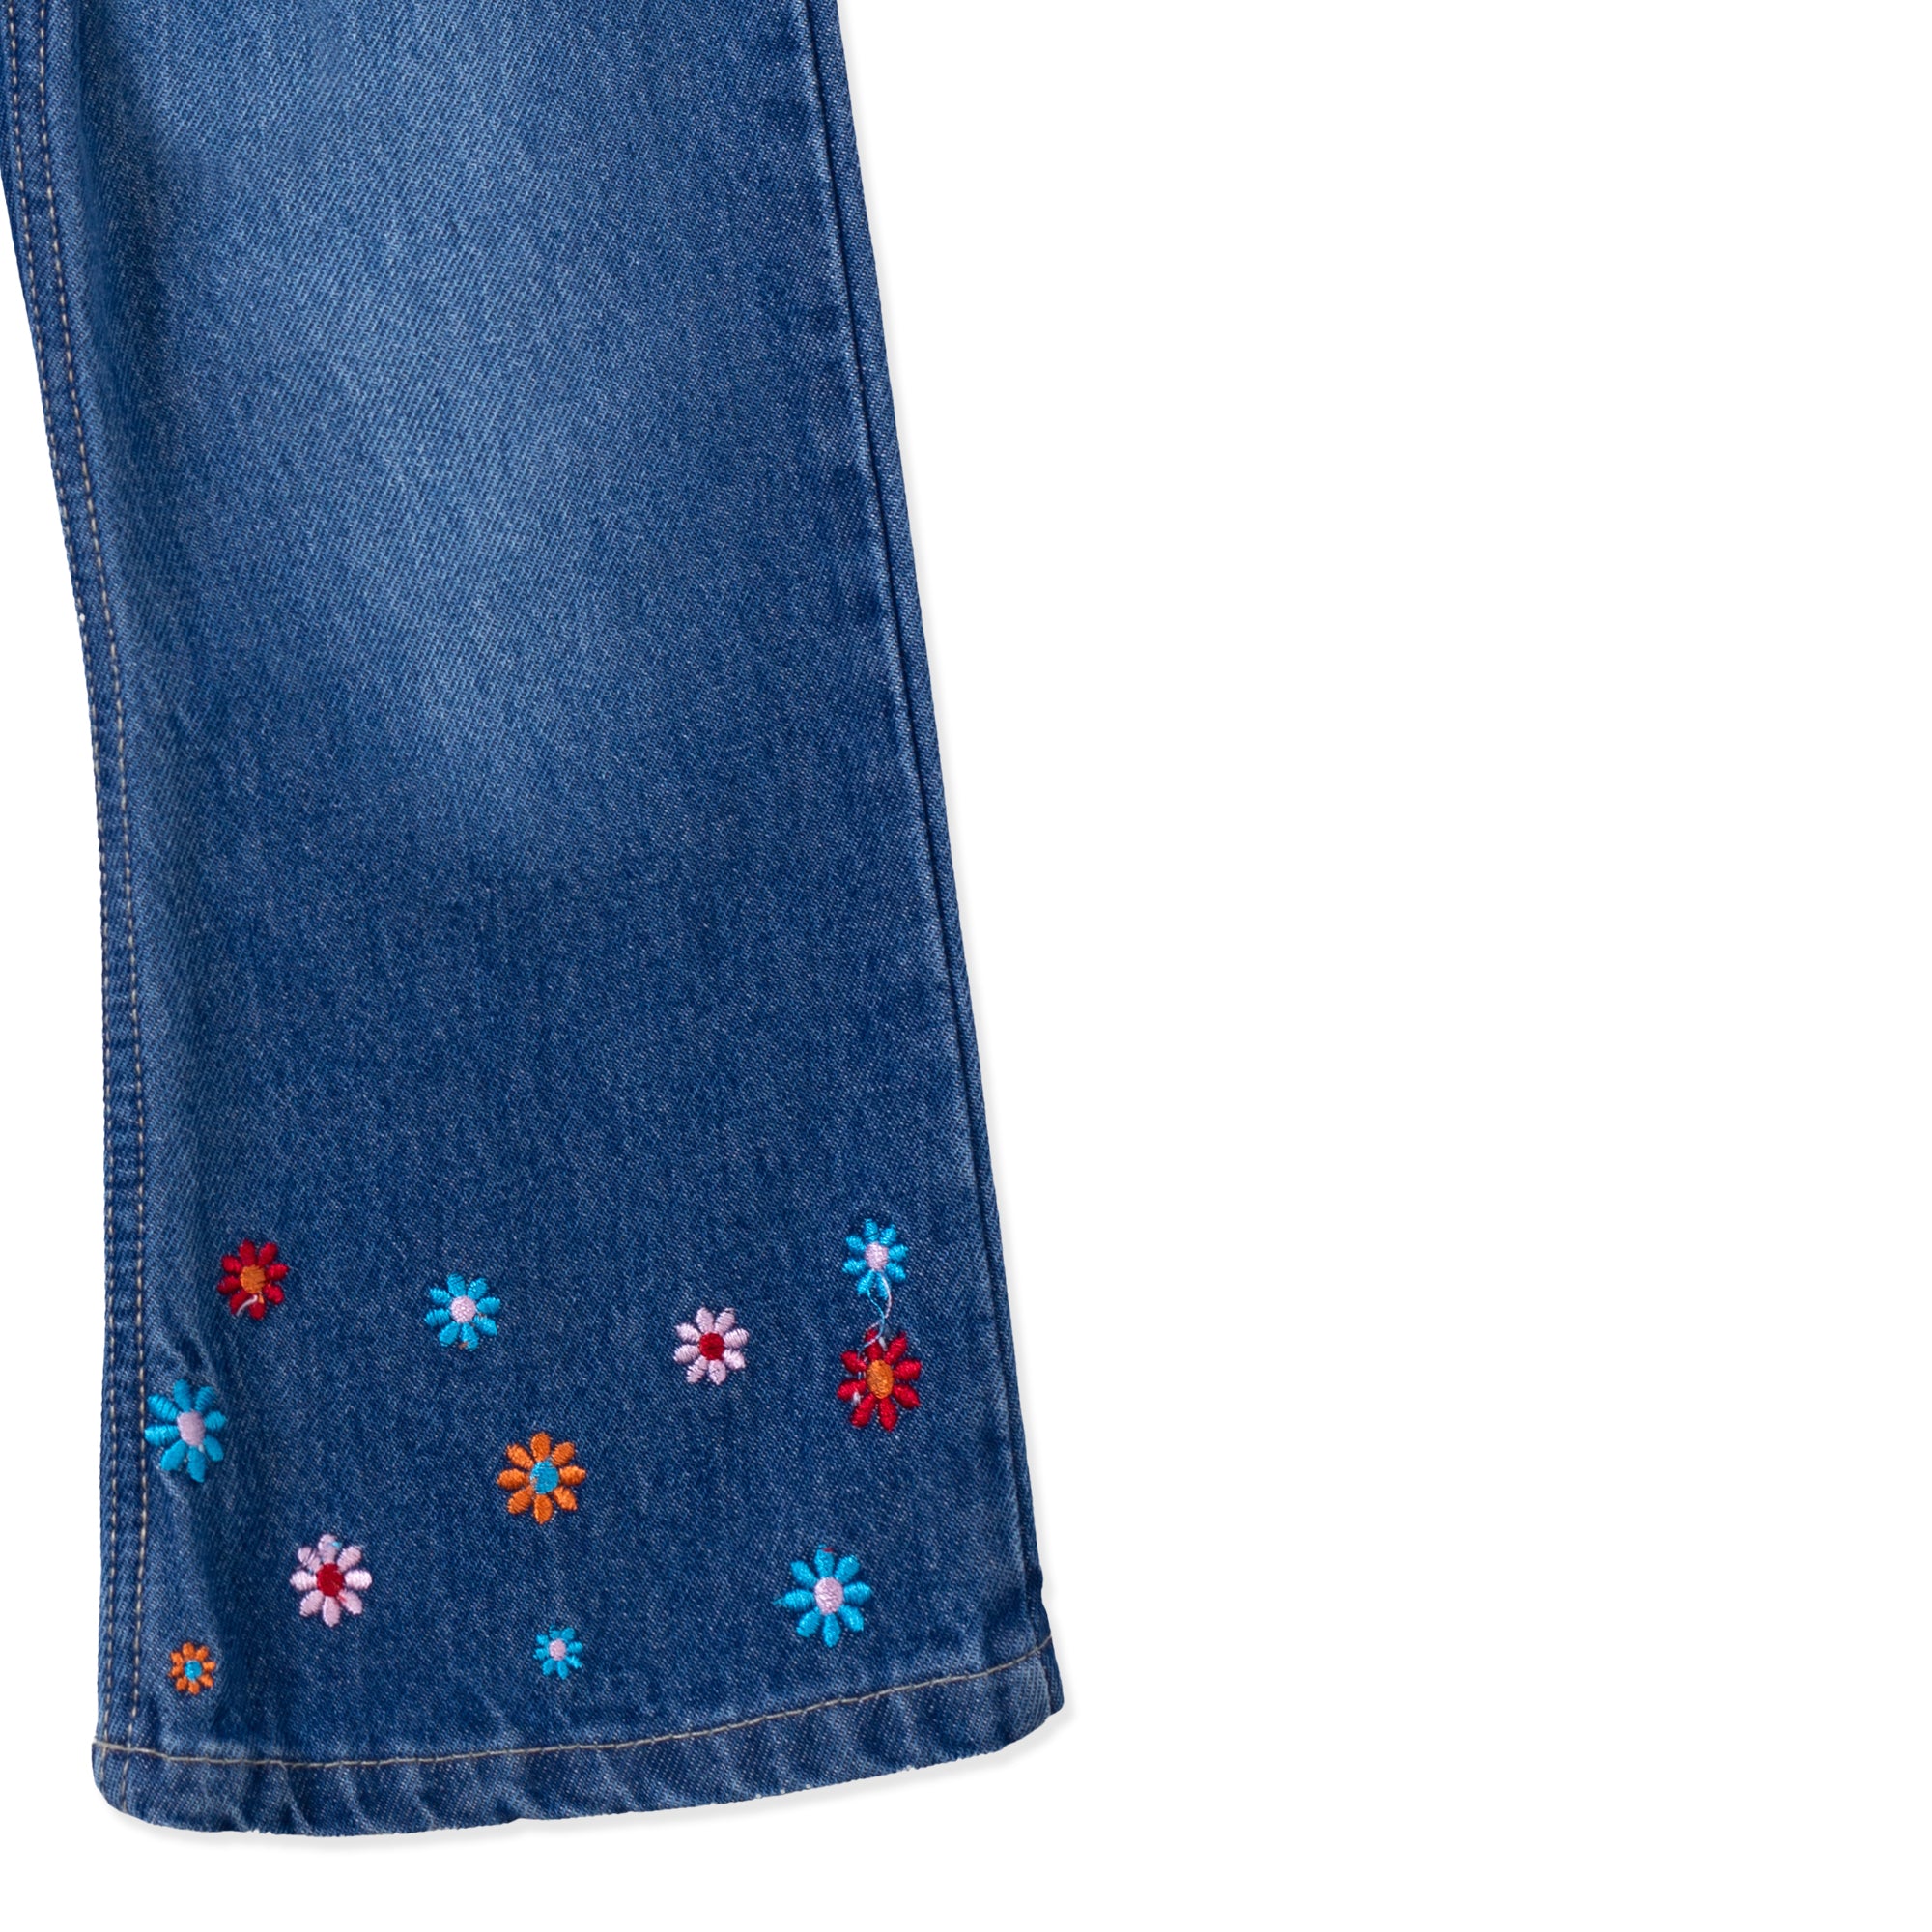 Girl's Blue Embroidered Jeans